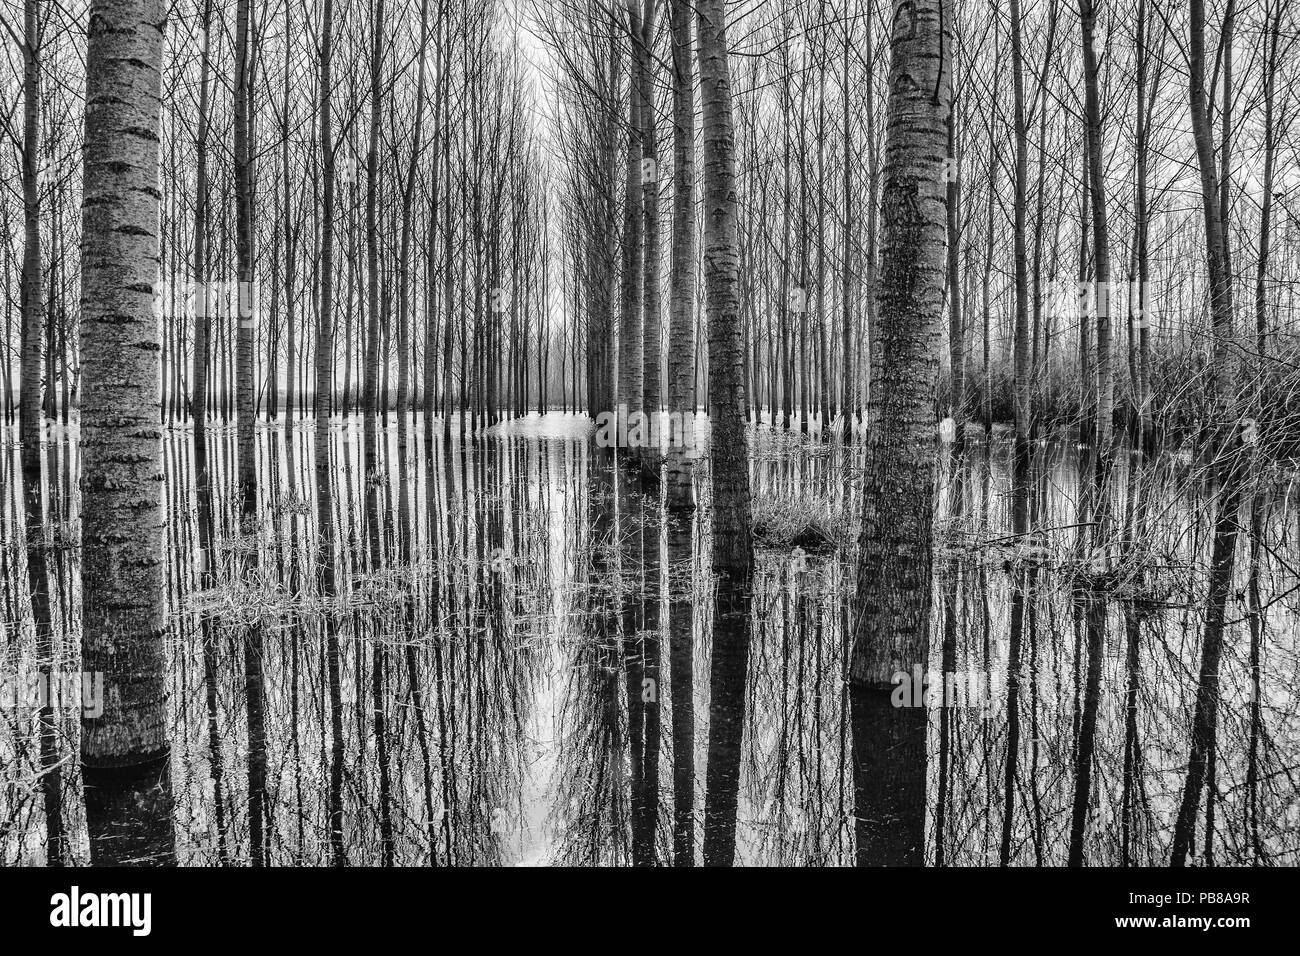 SYMMETRIES IN THE SUBMERGED FOREST Stock Photo